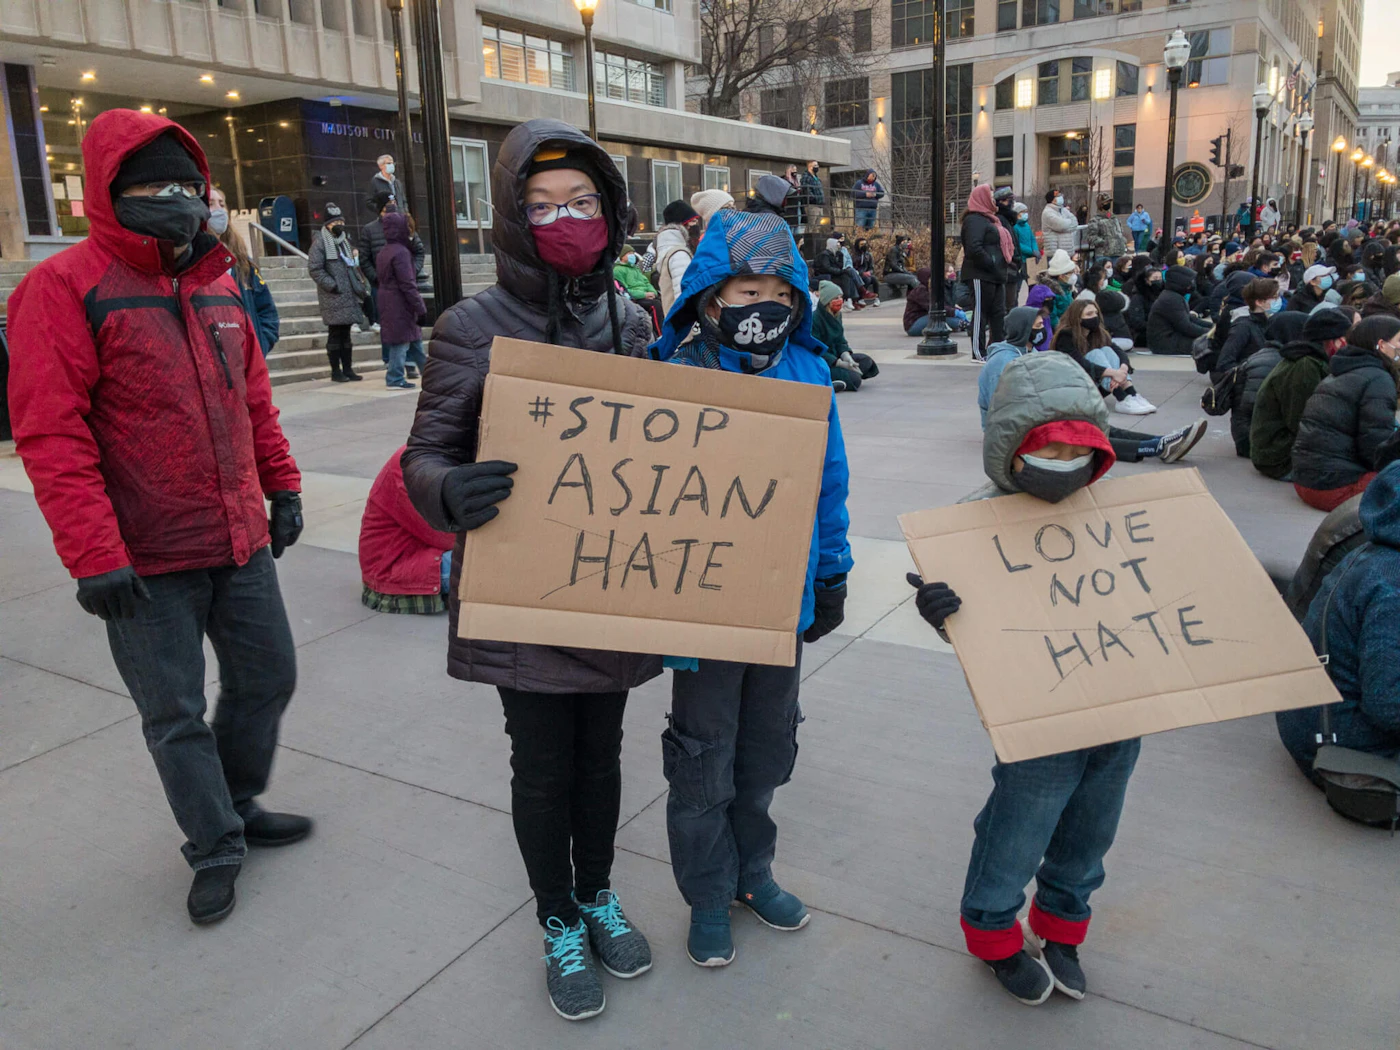 This family was among about 200 people who attended a march Thursday evening in Madison to support of the Asian American and Pacific Islander community in the wake of a shooting spree in Georgia that left eight dead, including six Asian women. (Photo by Christina Lieffring)